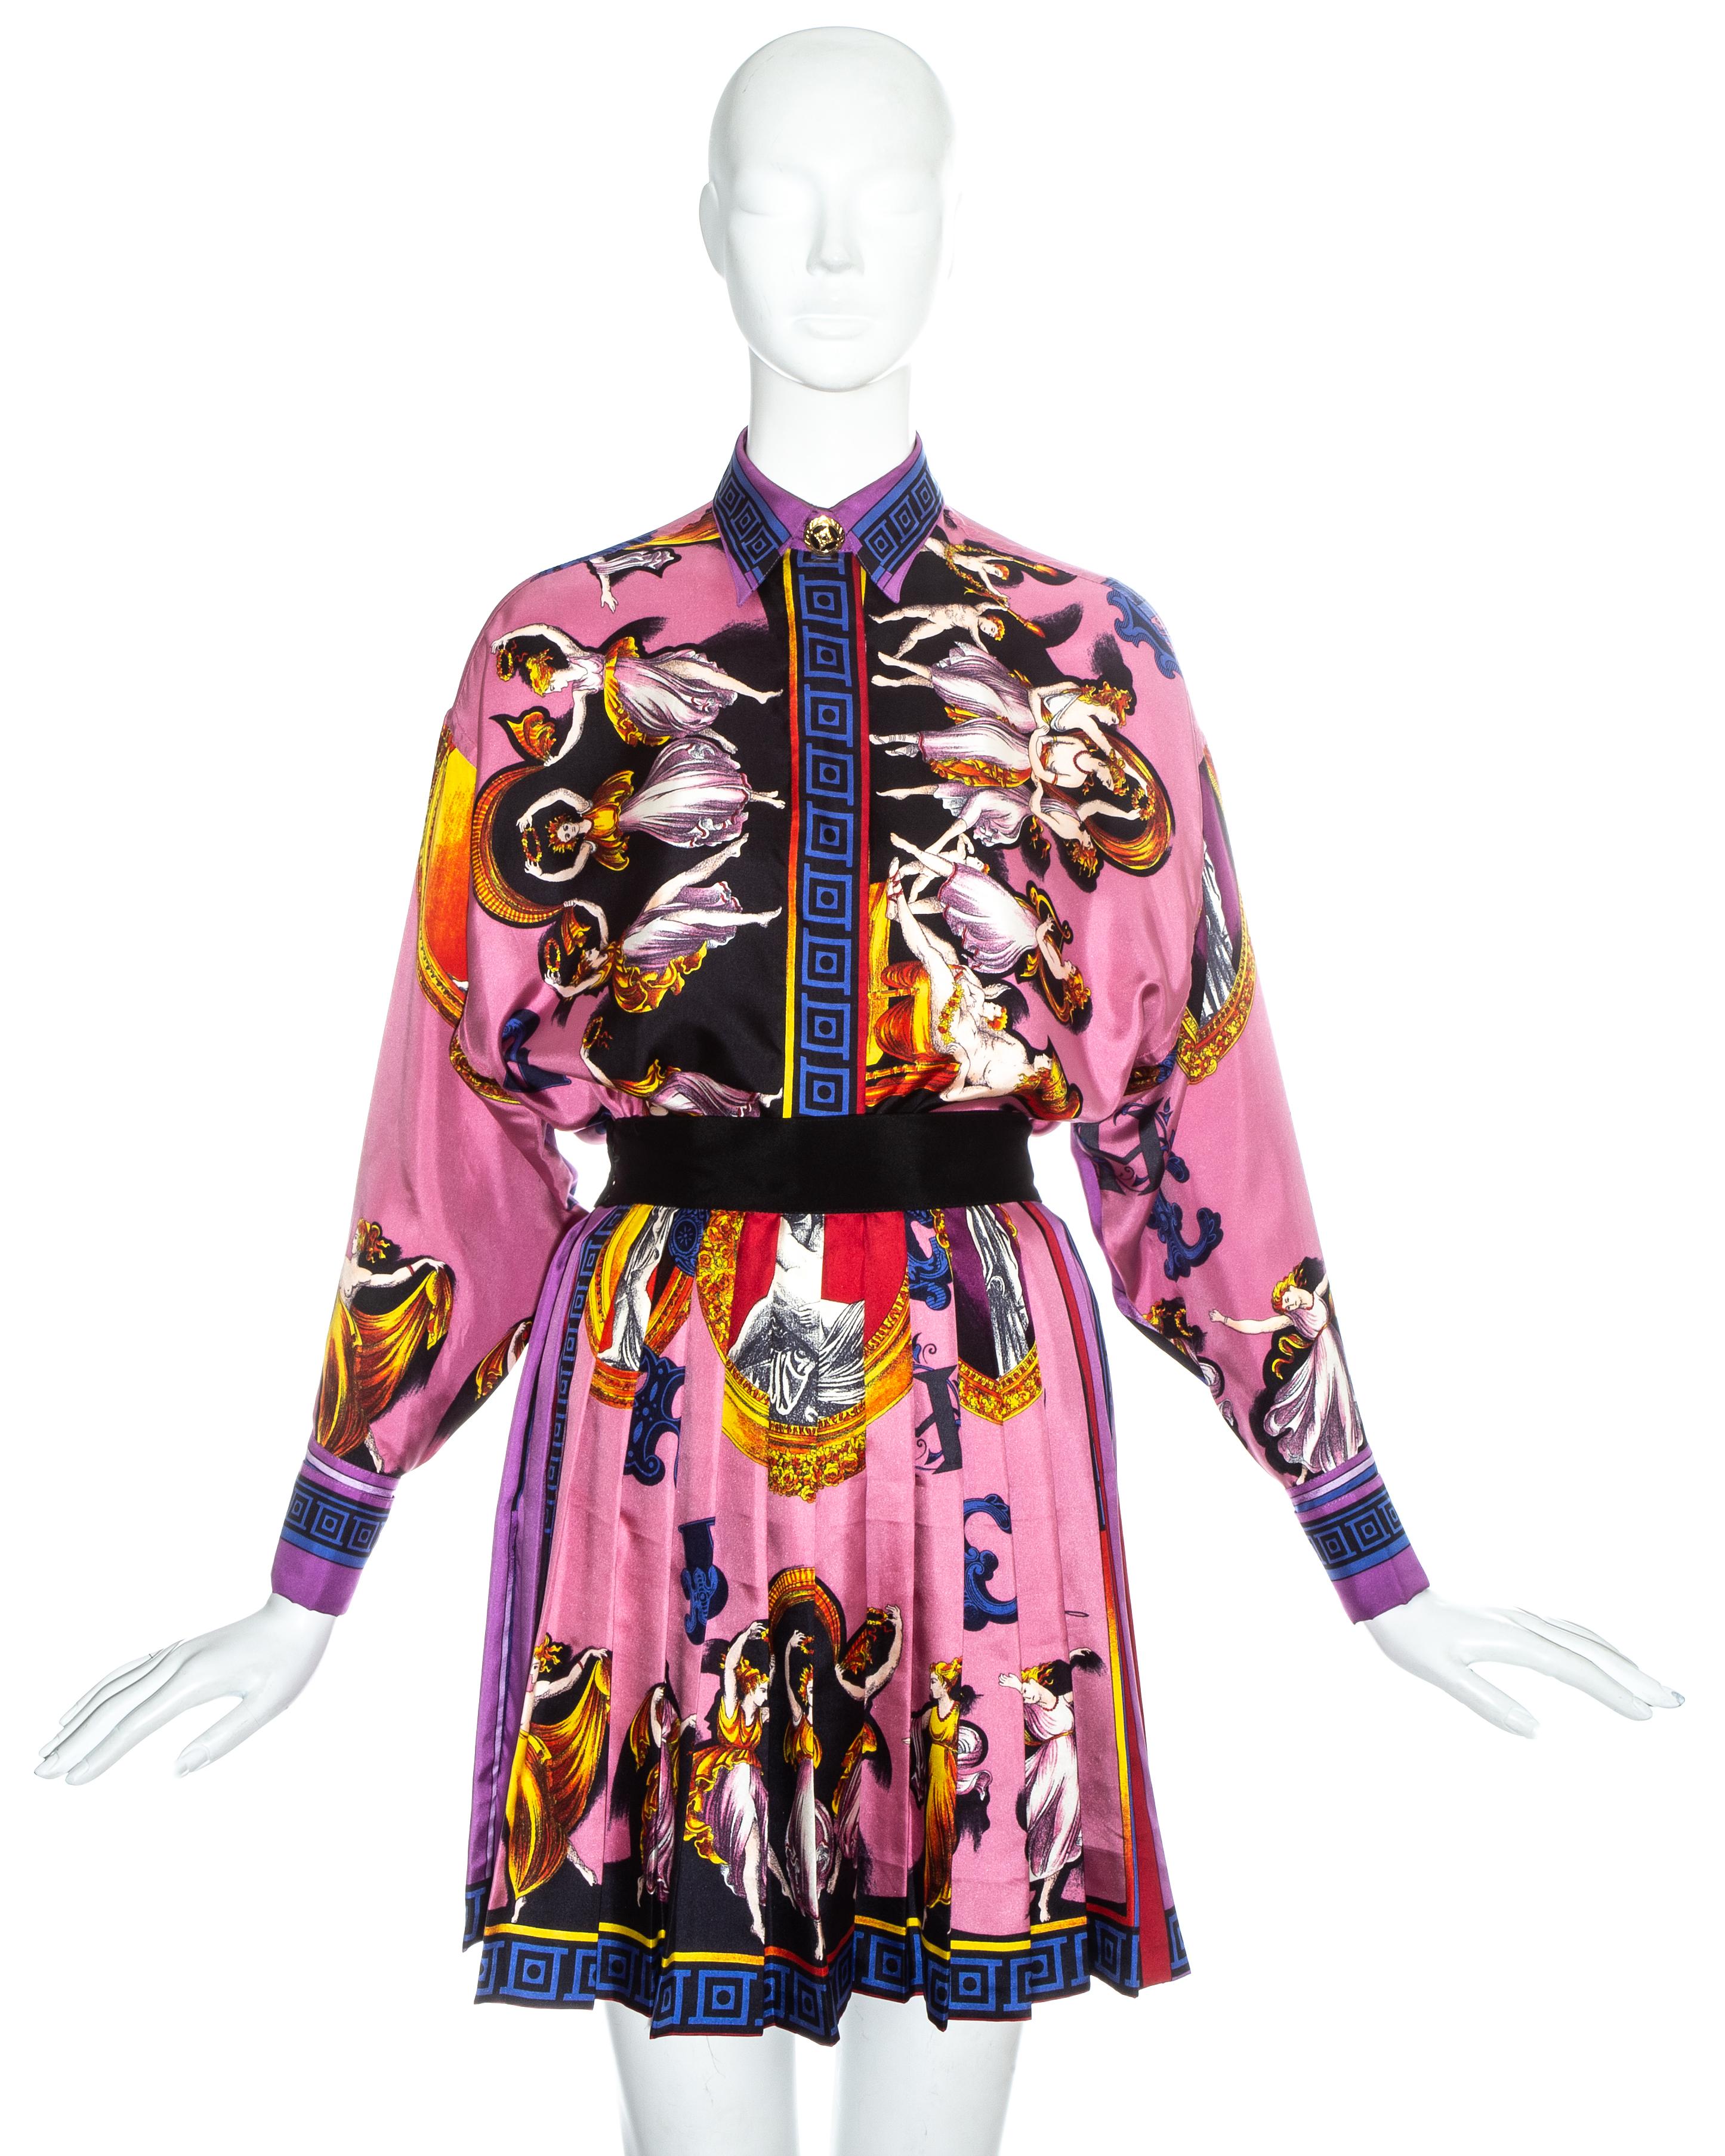 Gianni Versace pink neoclassical printed silk skirt suit, fw 1991 (Pink)